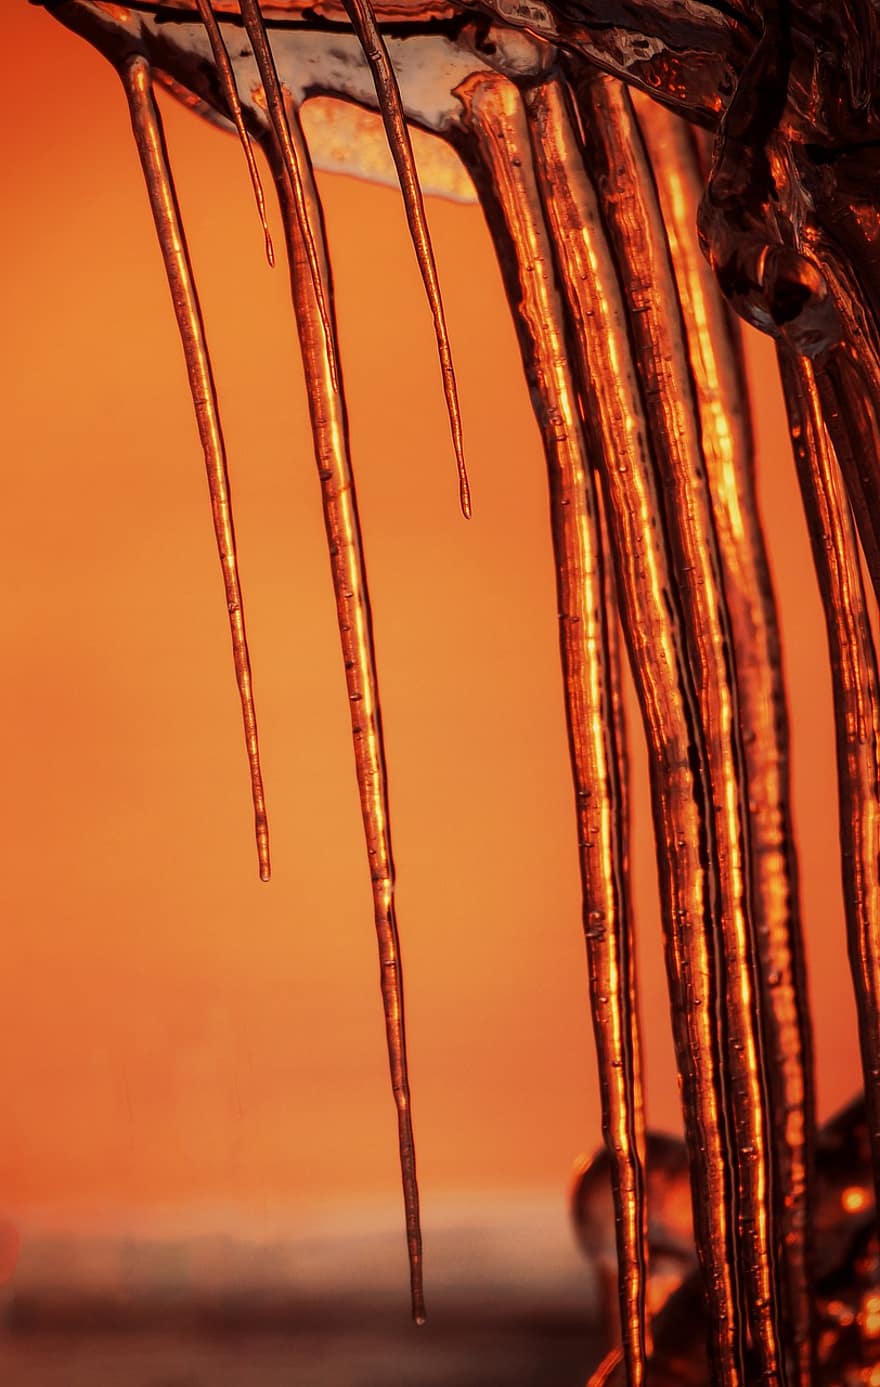 Icicle, Sunset, Sunlight, Hanging, Cold, Pointy, close-up, backgrounds, drop, ice, abstract